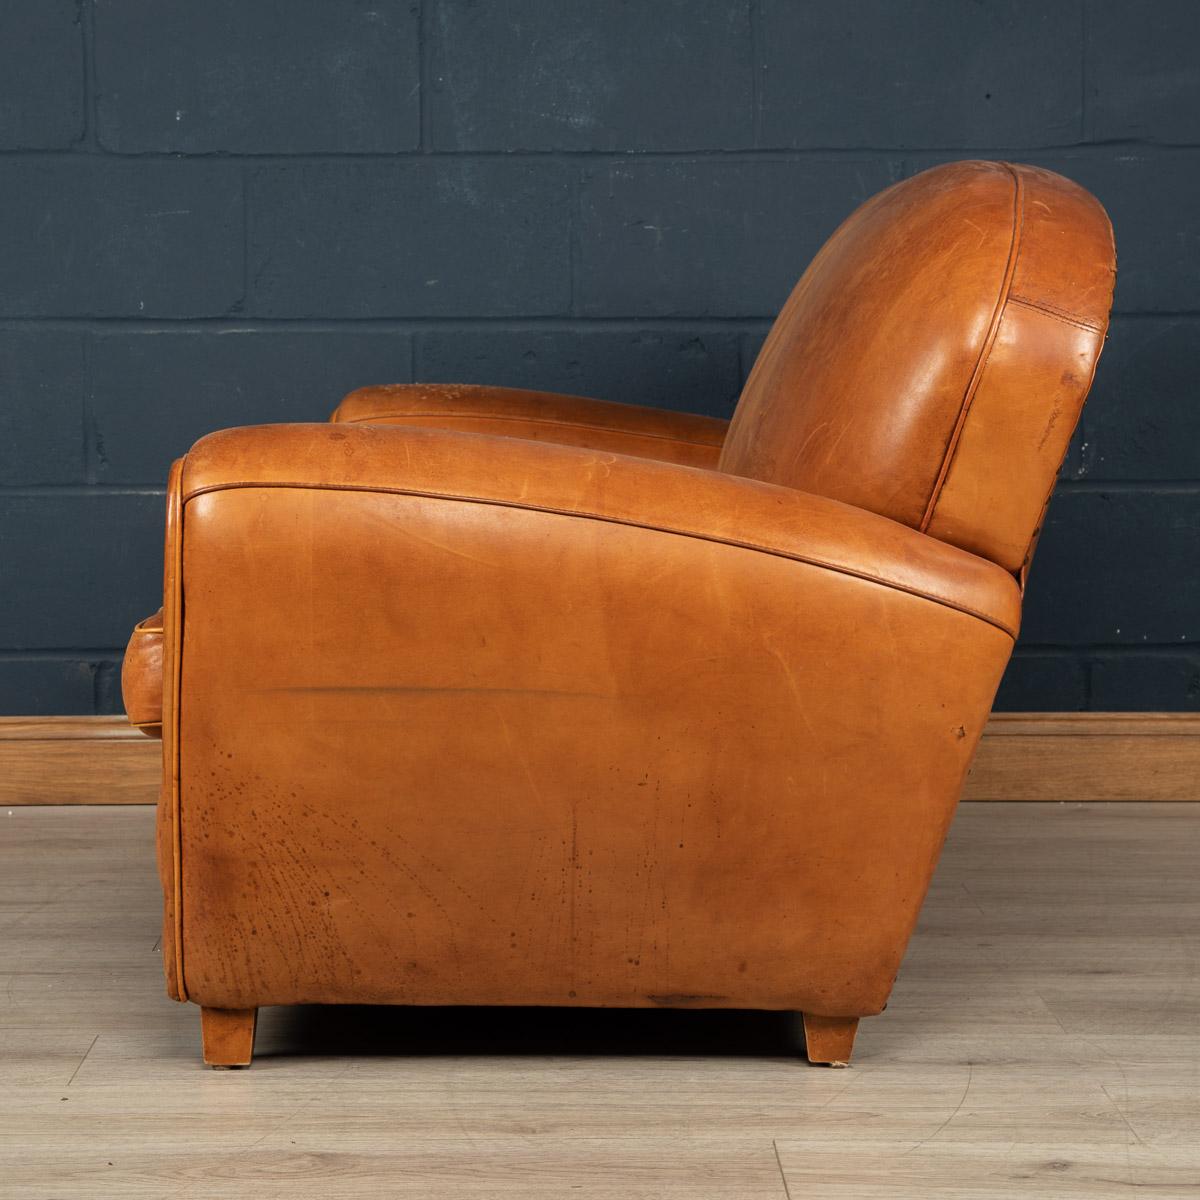 A fine quality leather two seater sofa made in France in the latter end of the last century. Hand made, the timber frame is clad with a wonderfully rich tan leather hide, supple to the touch and extremely comfortable. Even though the sofa shows some